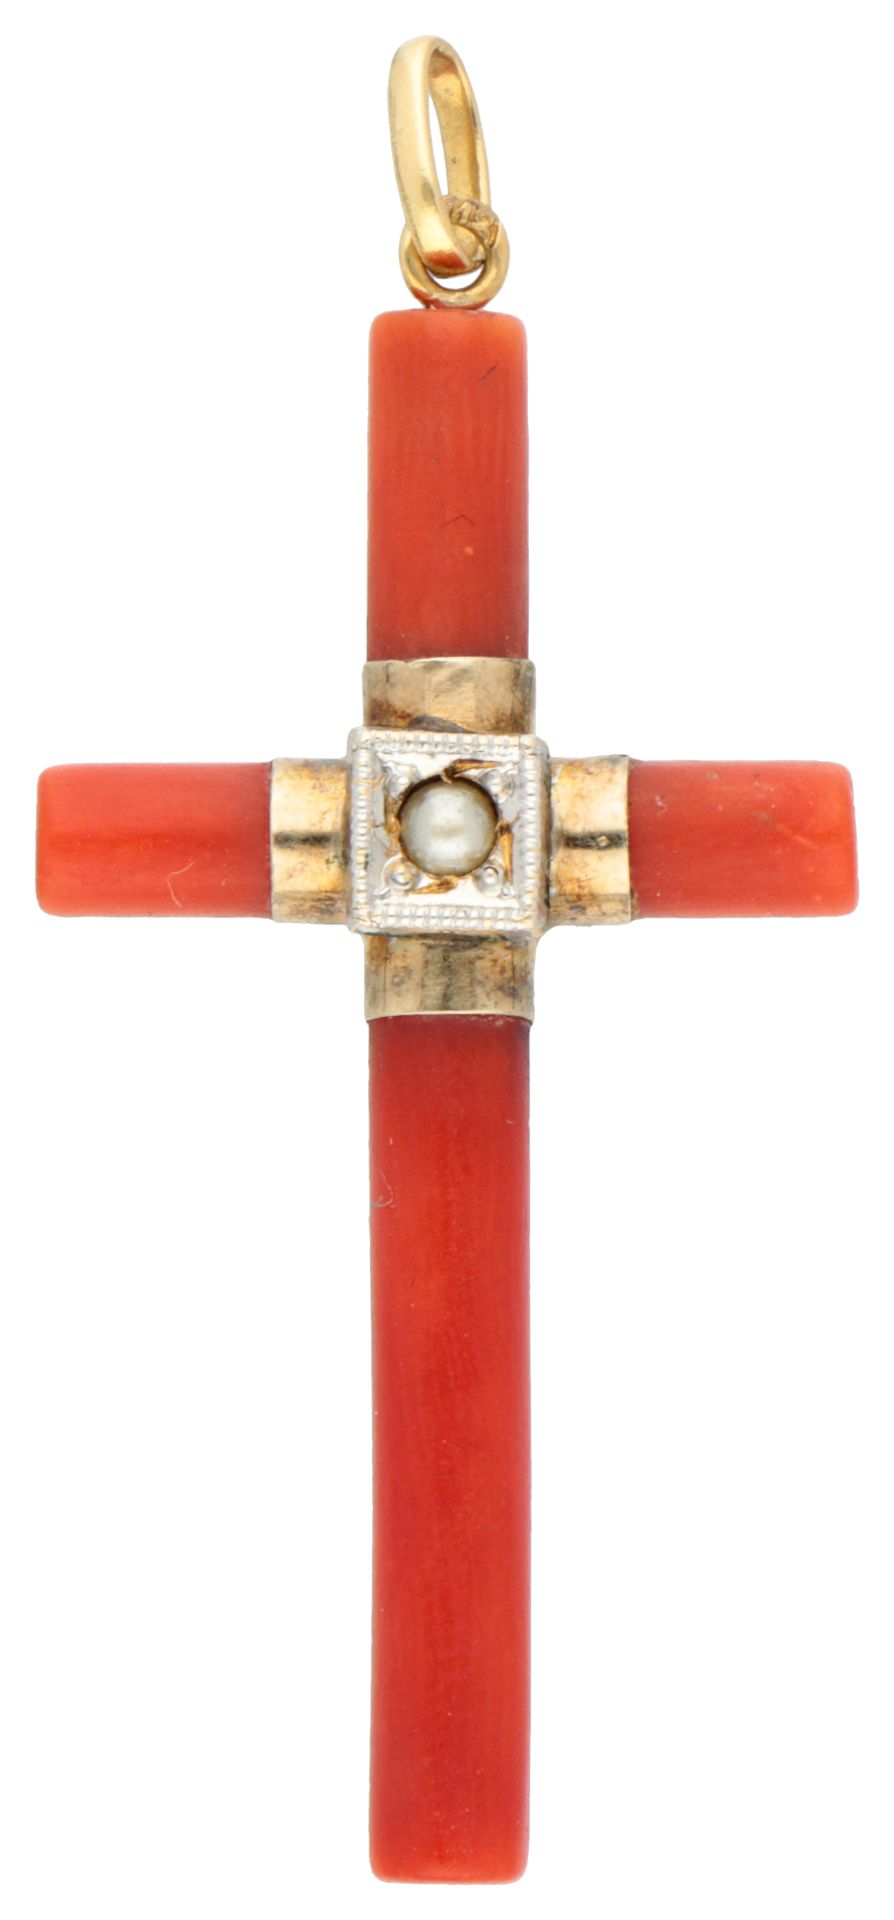 No reserve - 18K Yellow gold cross pendant set with red coral and a pearl.